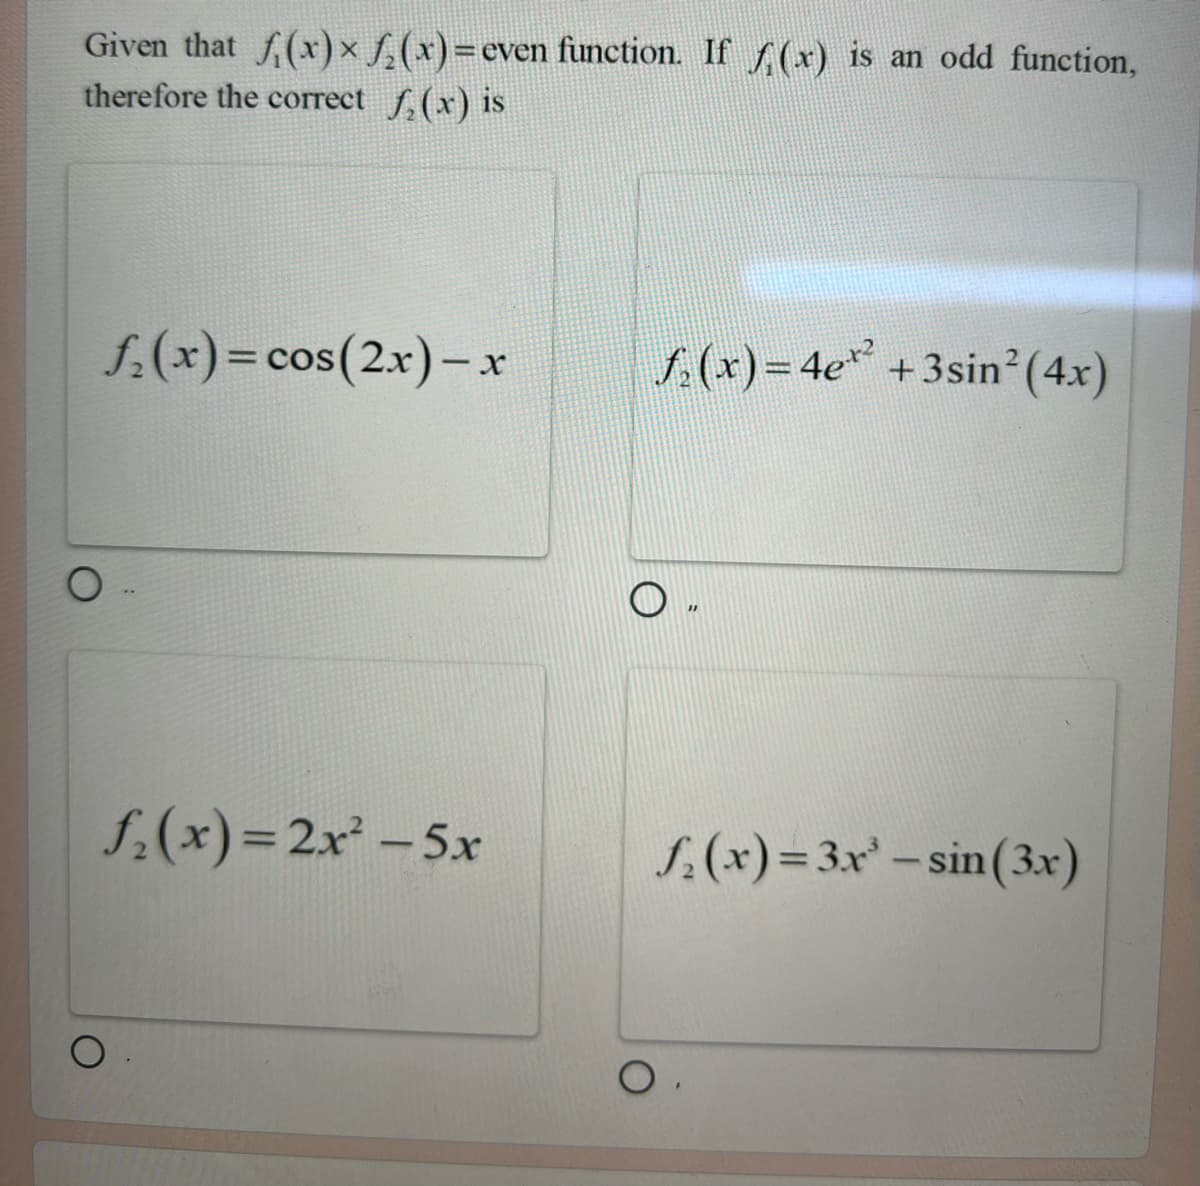 Given that f(x) x₂(x)= even function. If (x) is an odd function,
therefore the correct f(x) is
f₂(x) = cos(2x)-x
O
f₂(x)=2x² - 5x
f(x)=4e*² +3sin² (4x)
f(x)=3x³-sin (3x)